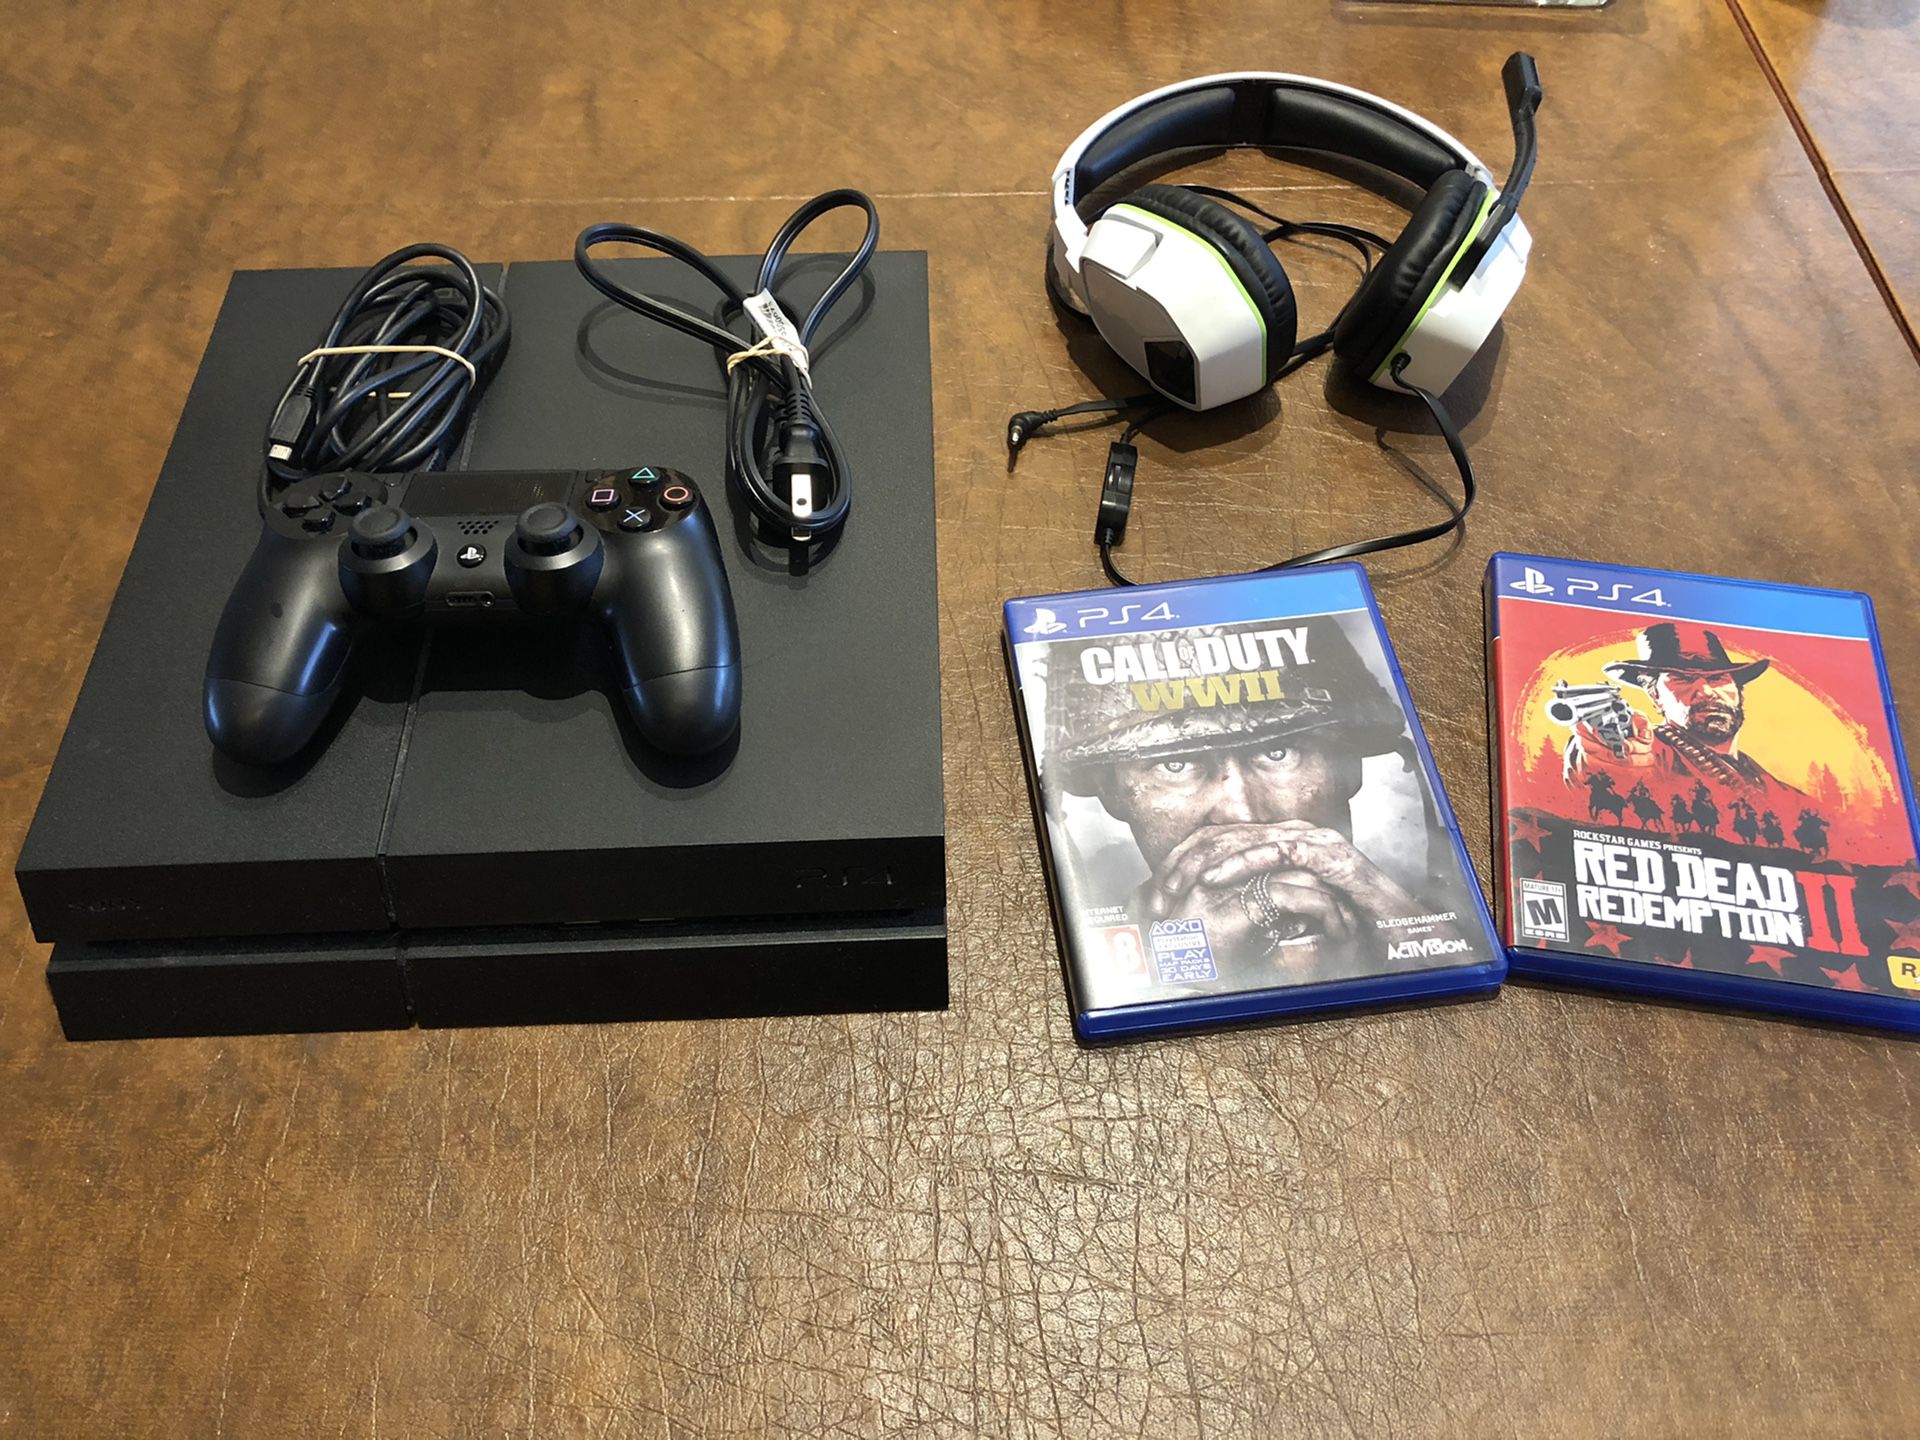 Ps4 w/games and headphones